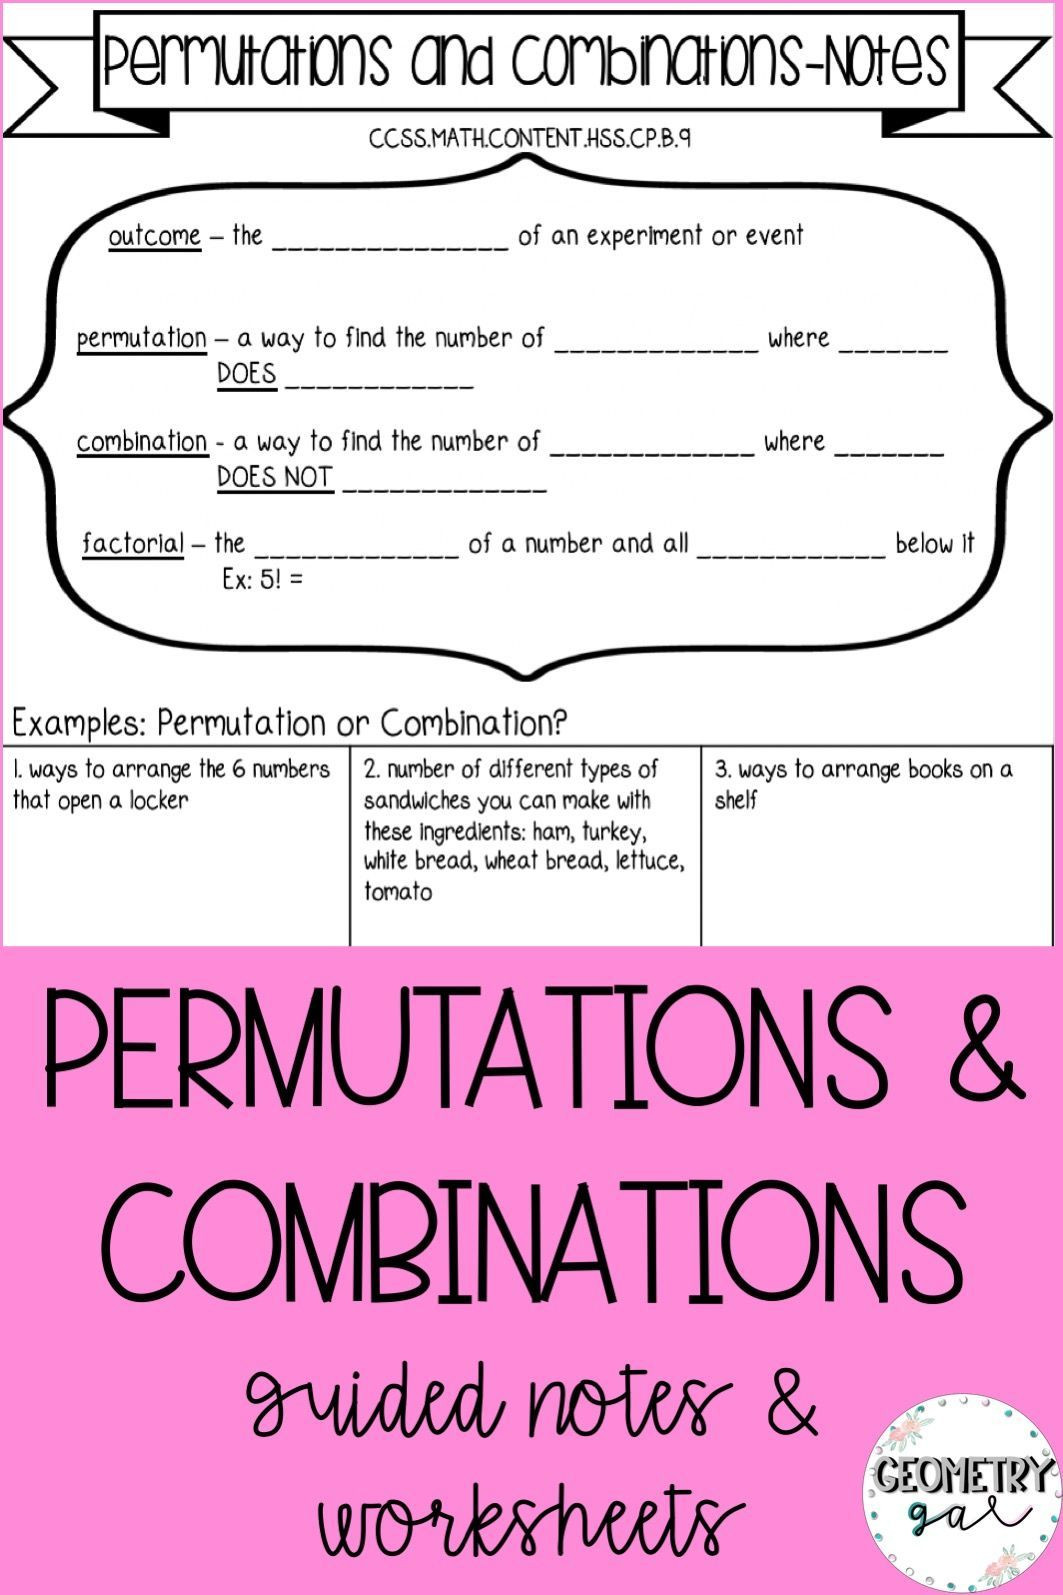 Combinations and Permutations Worksheet Permutations and Binations Guided Notes and Worksheets